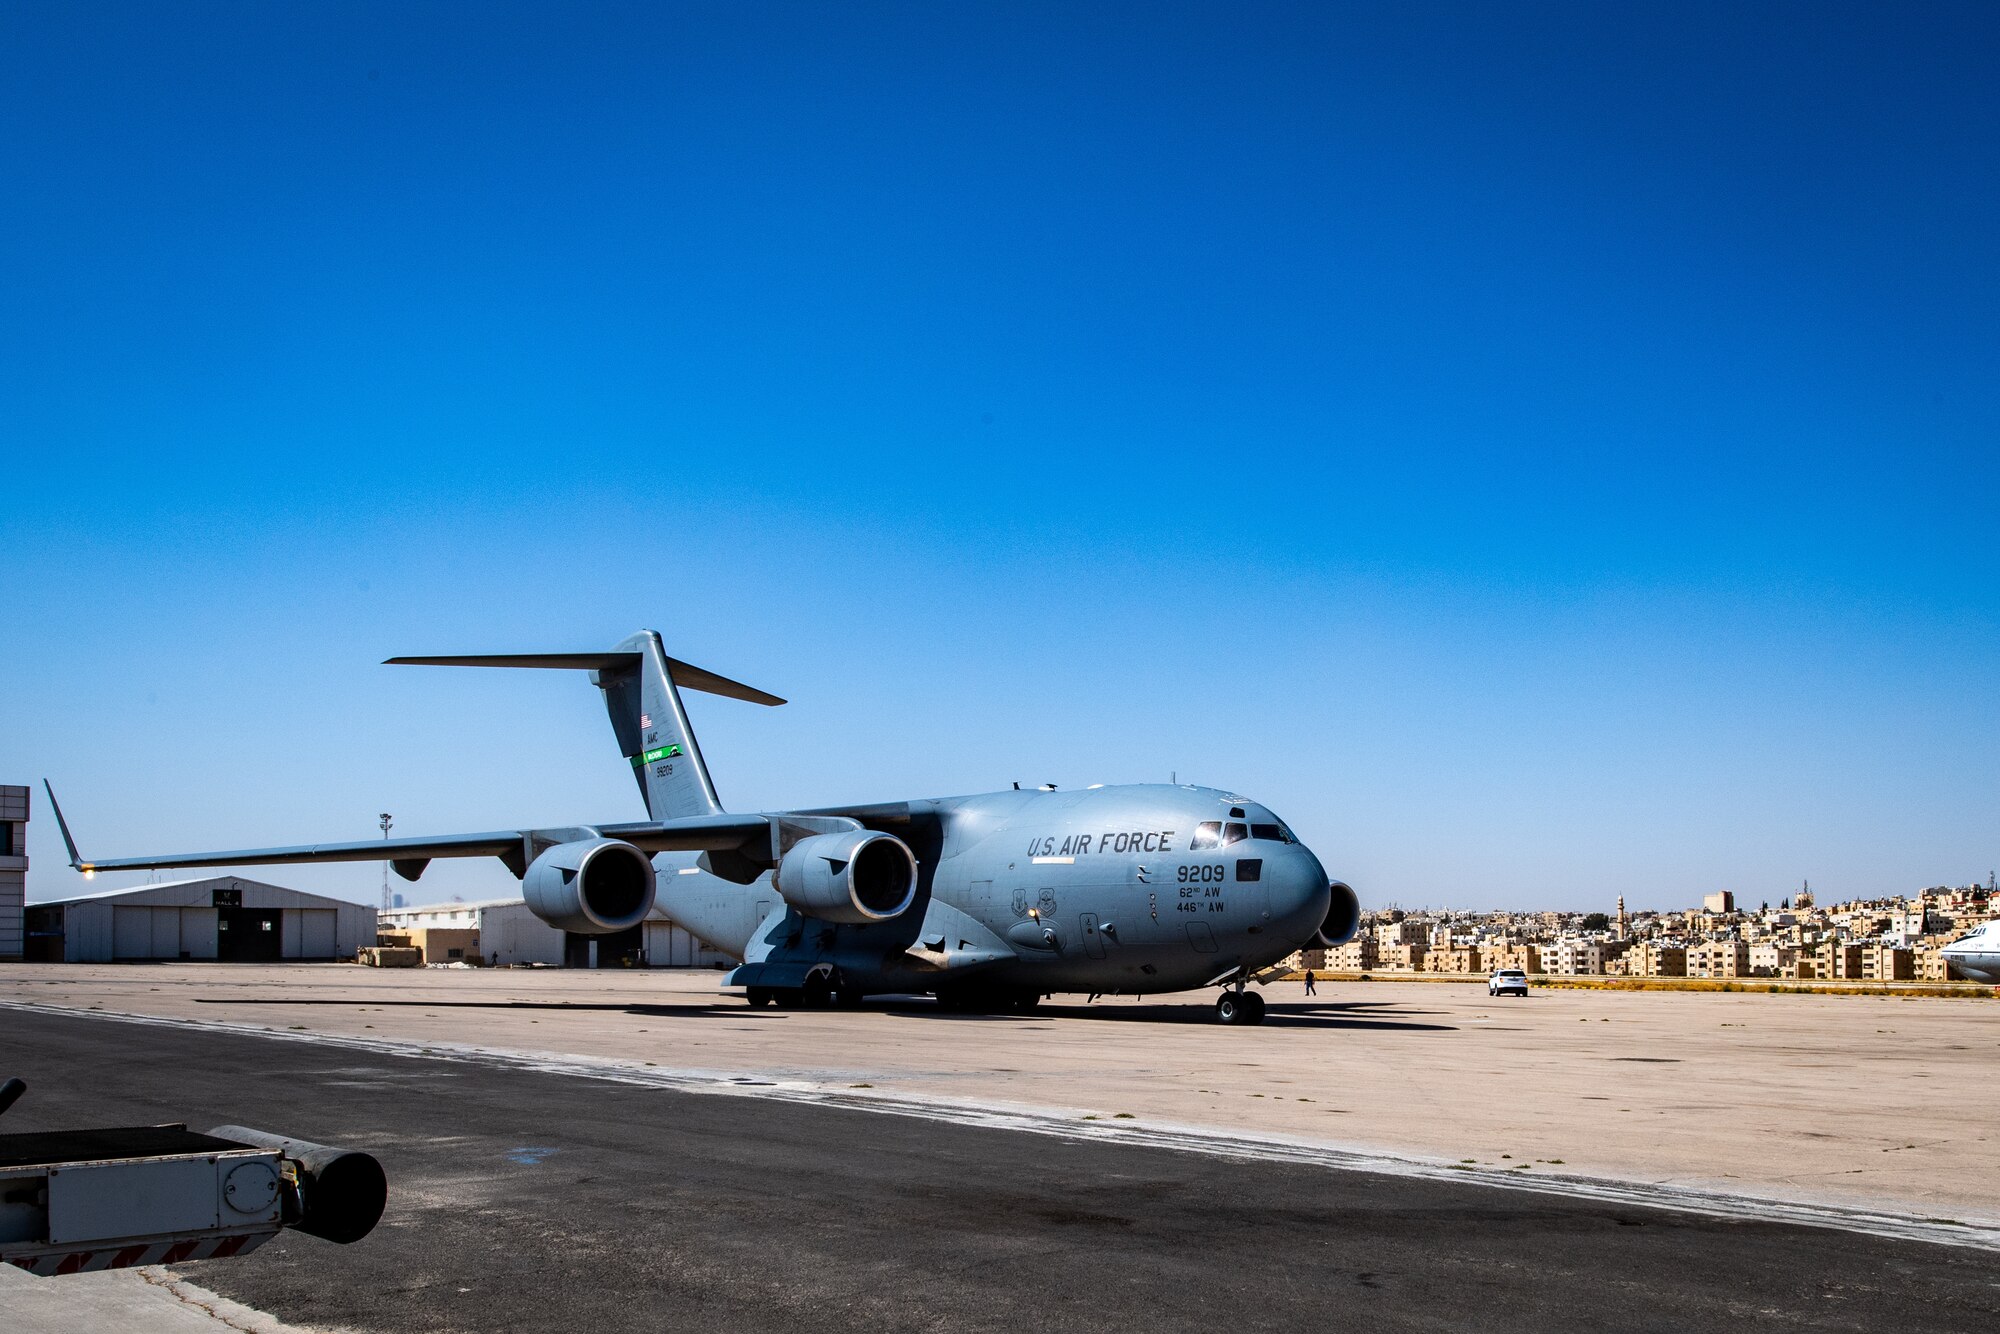 A U.S. Air Force C-17 Globemaster III taxis into position after landing in Jordan, Oct. 14, 2019. The port provides aerial logistics for the American Embassy to Jordan through the Military Assistance Program, handling cargo and passenger movement in support of State Department efforts.